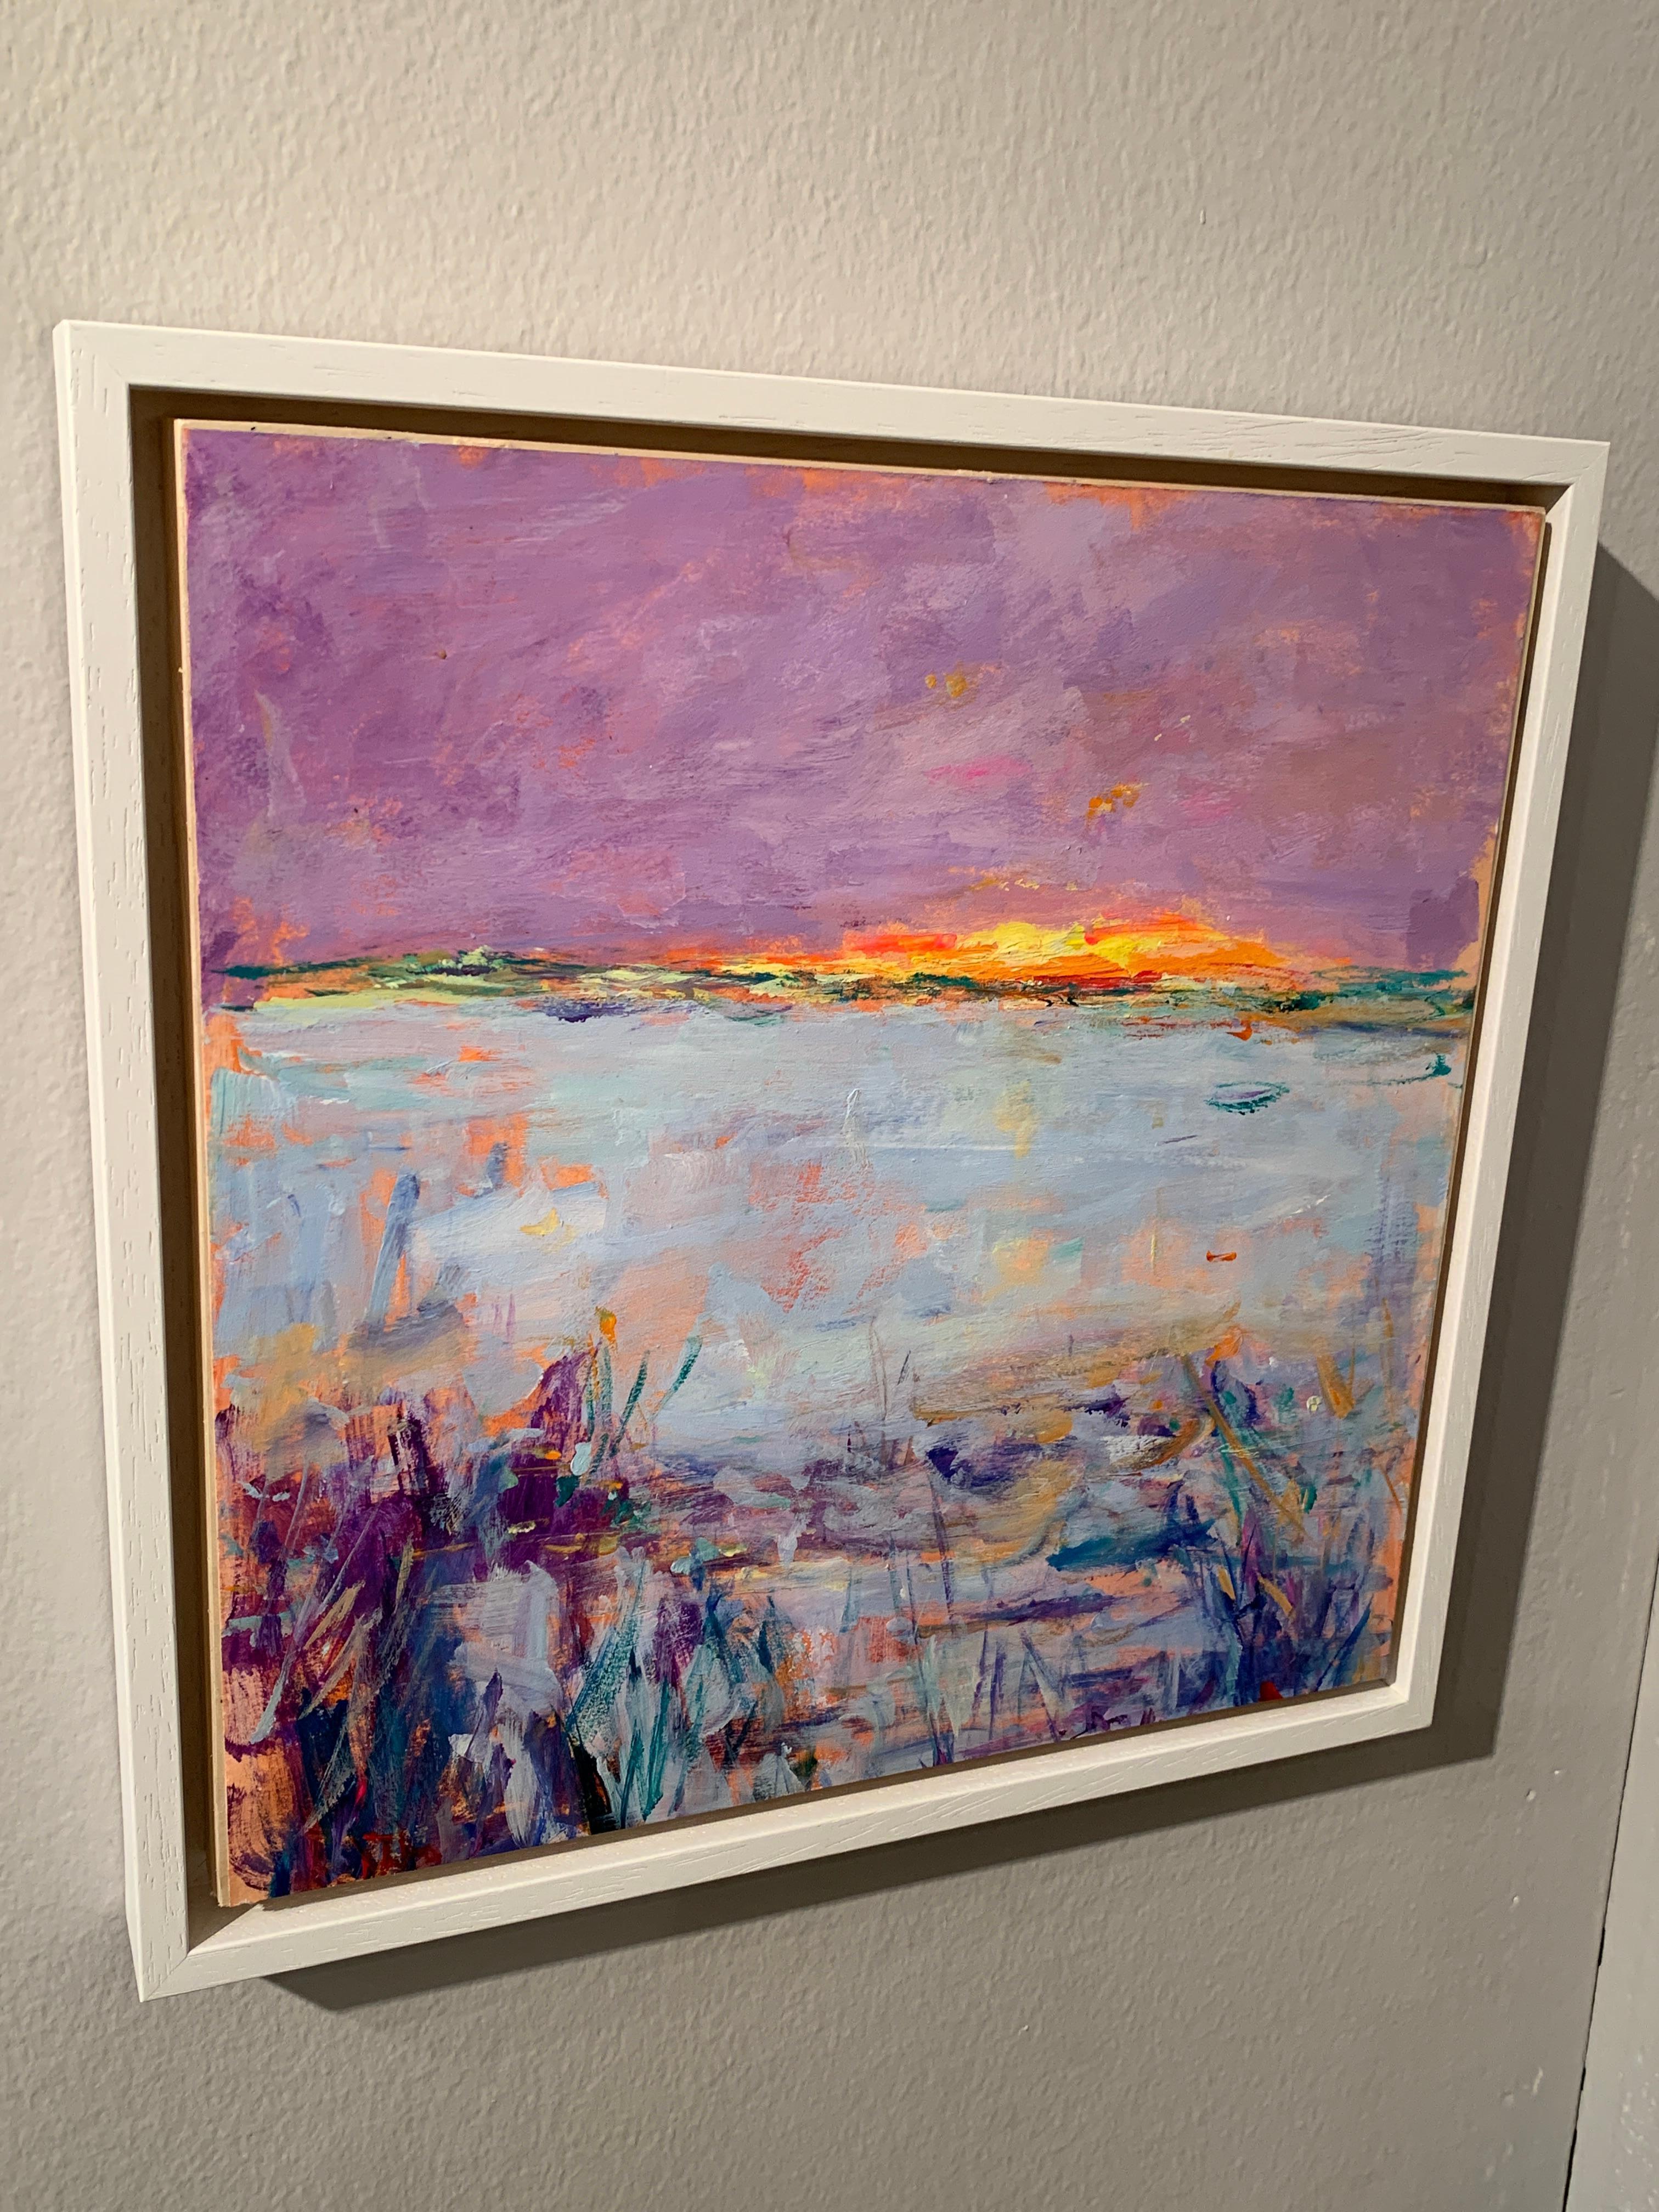 Outstanding American / English Impressionist, Sunset over a lake in Connecticut.

Charles Bertie Hall is a painter from England and America. He painted in a loose Impressionist style, much inspired by the work of Edward Seago, Albert Goodwin, and